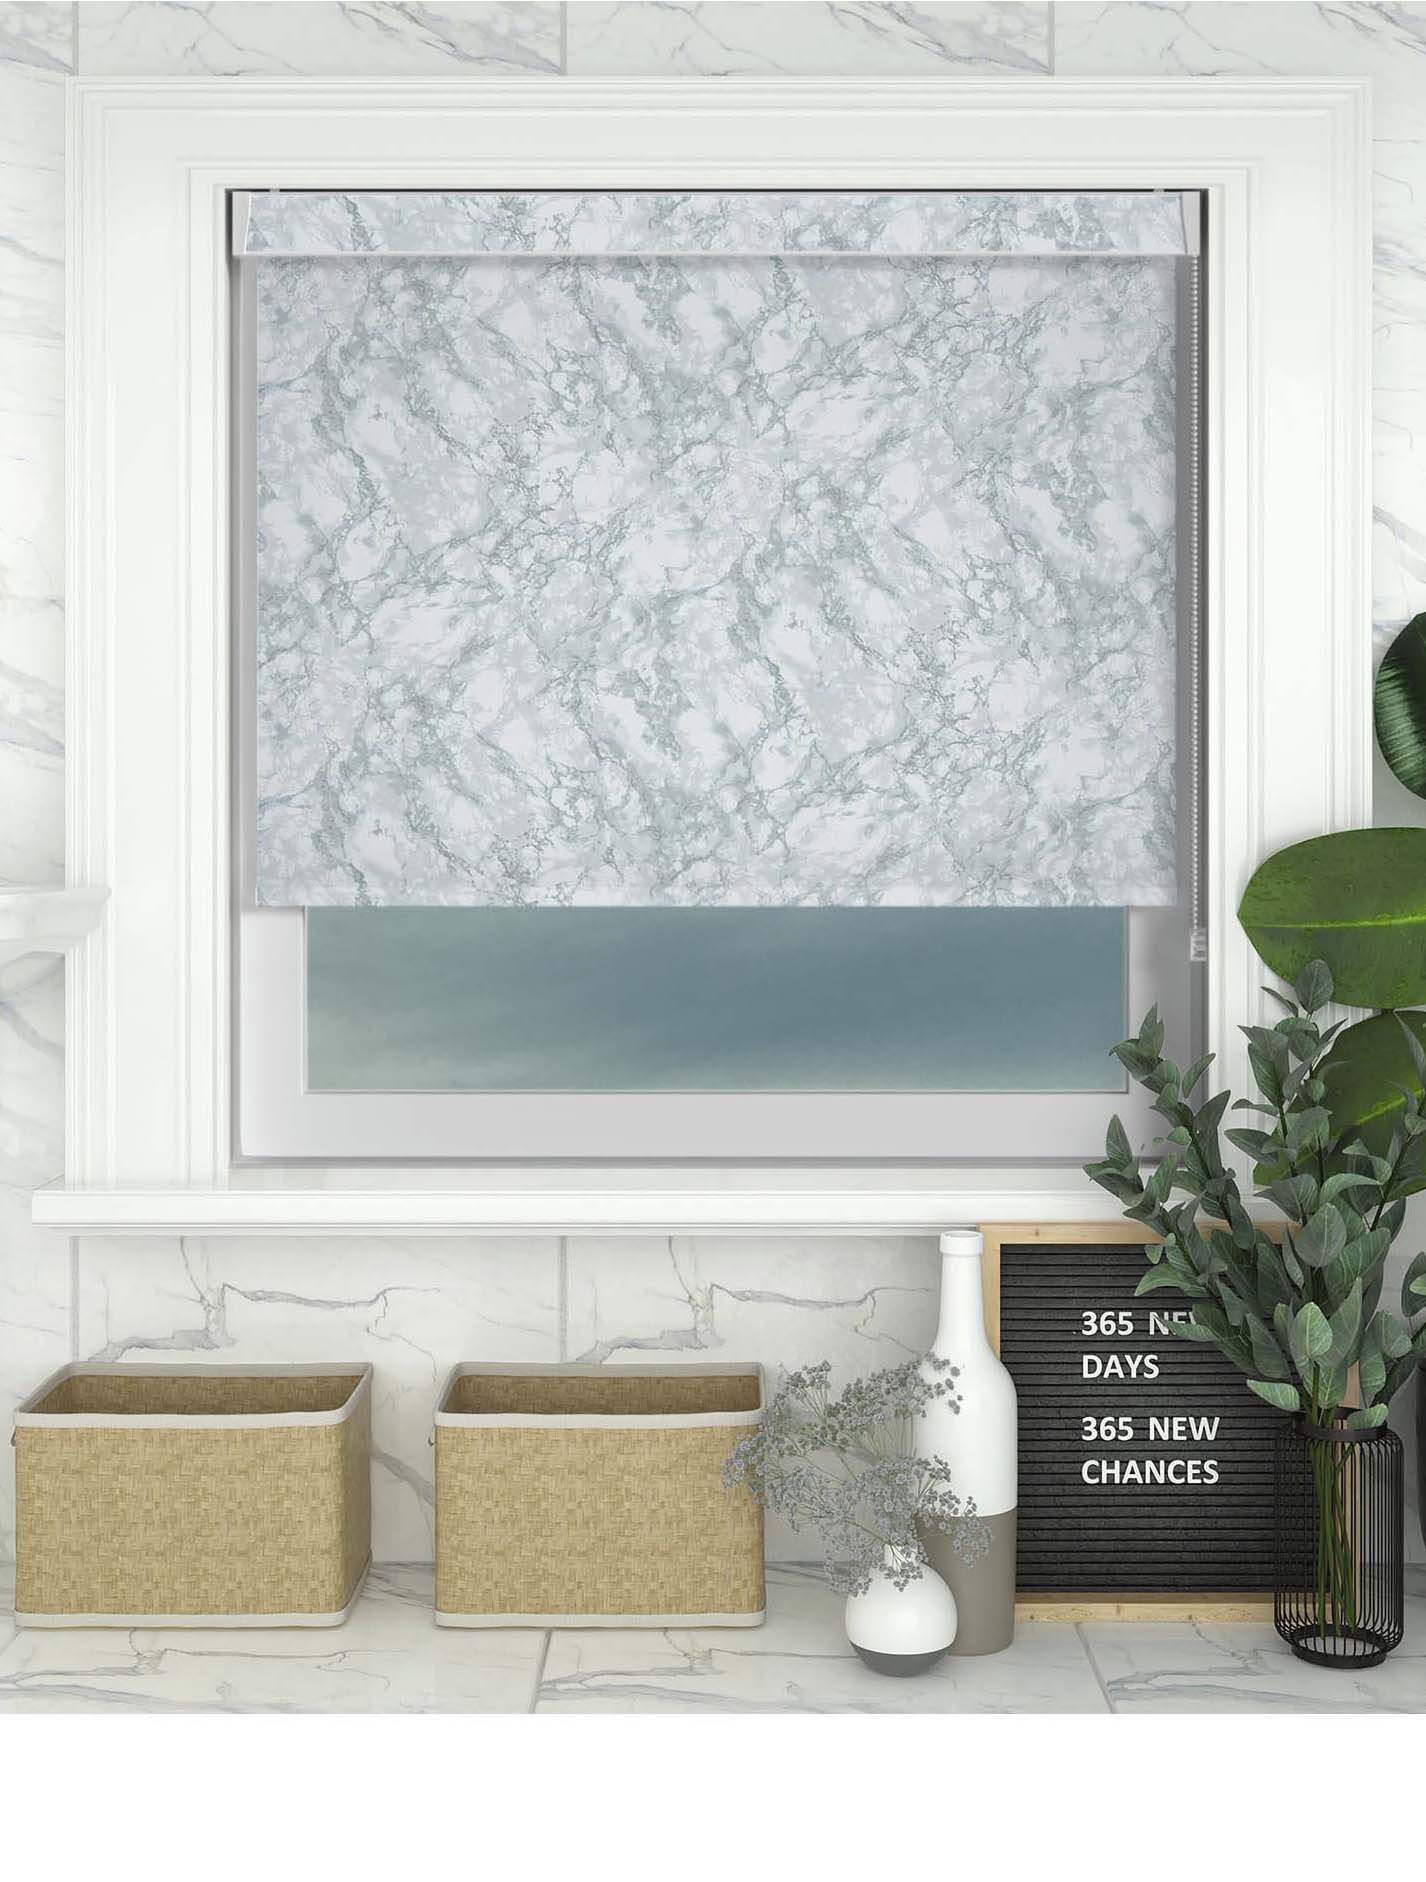 How To Choose The Perfect Waterproof Bathroom Blinds